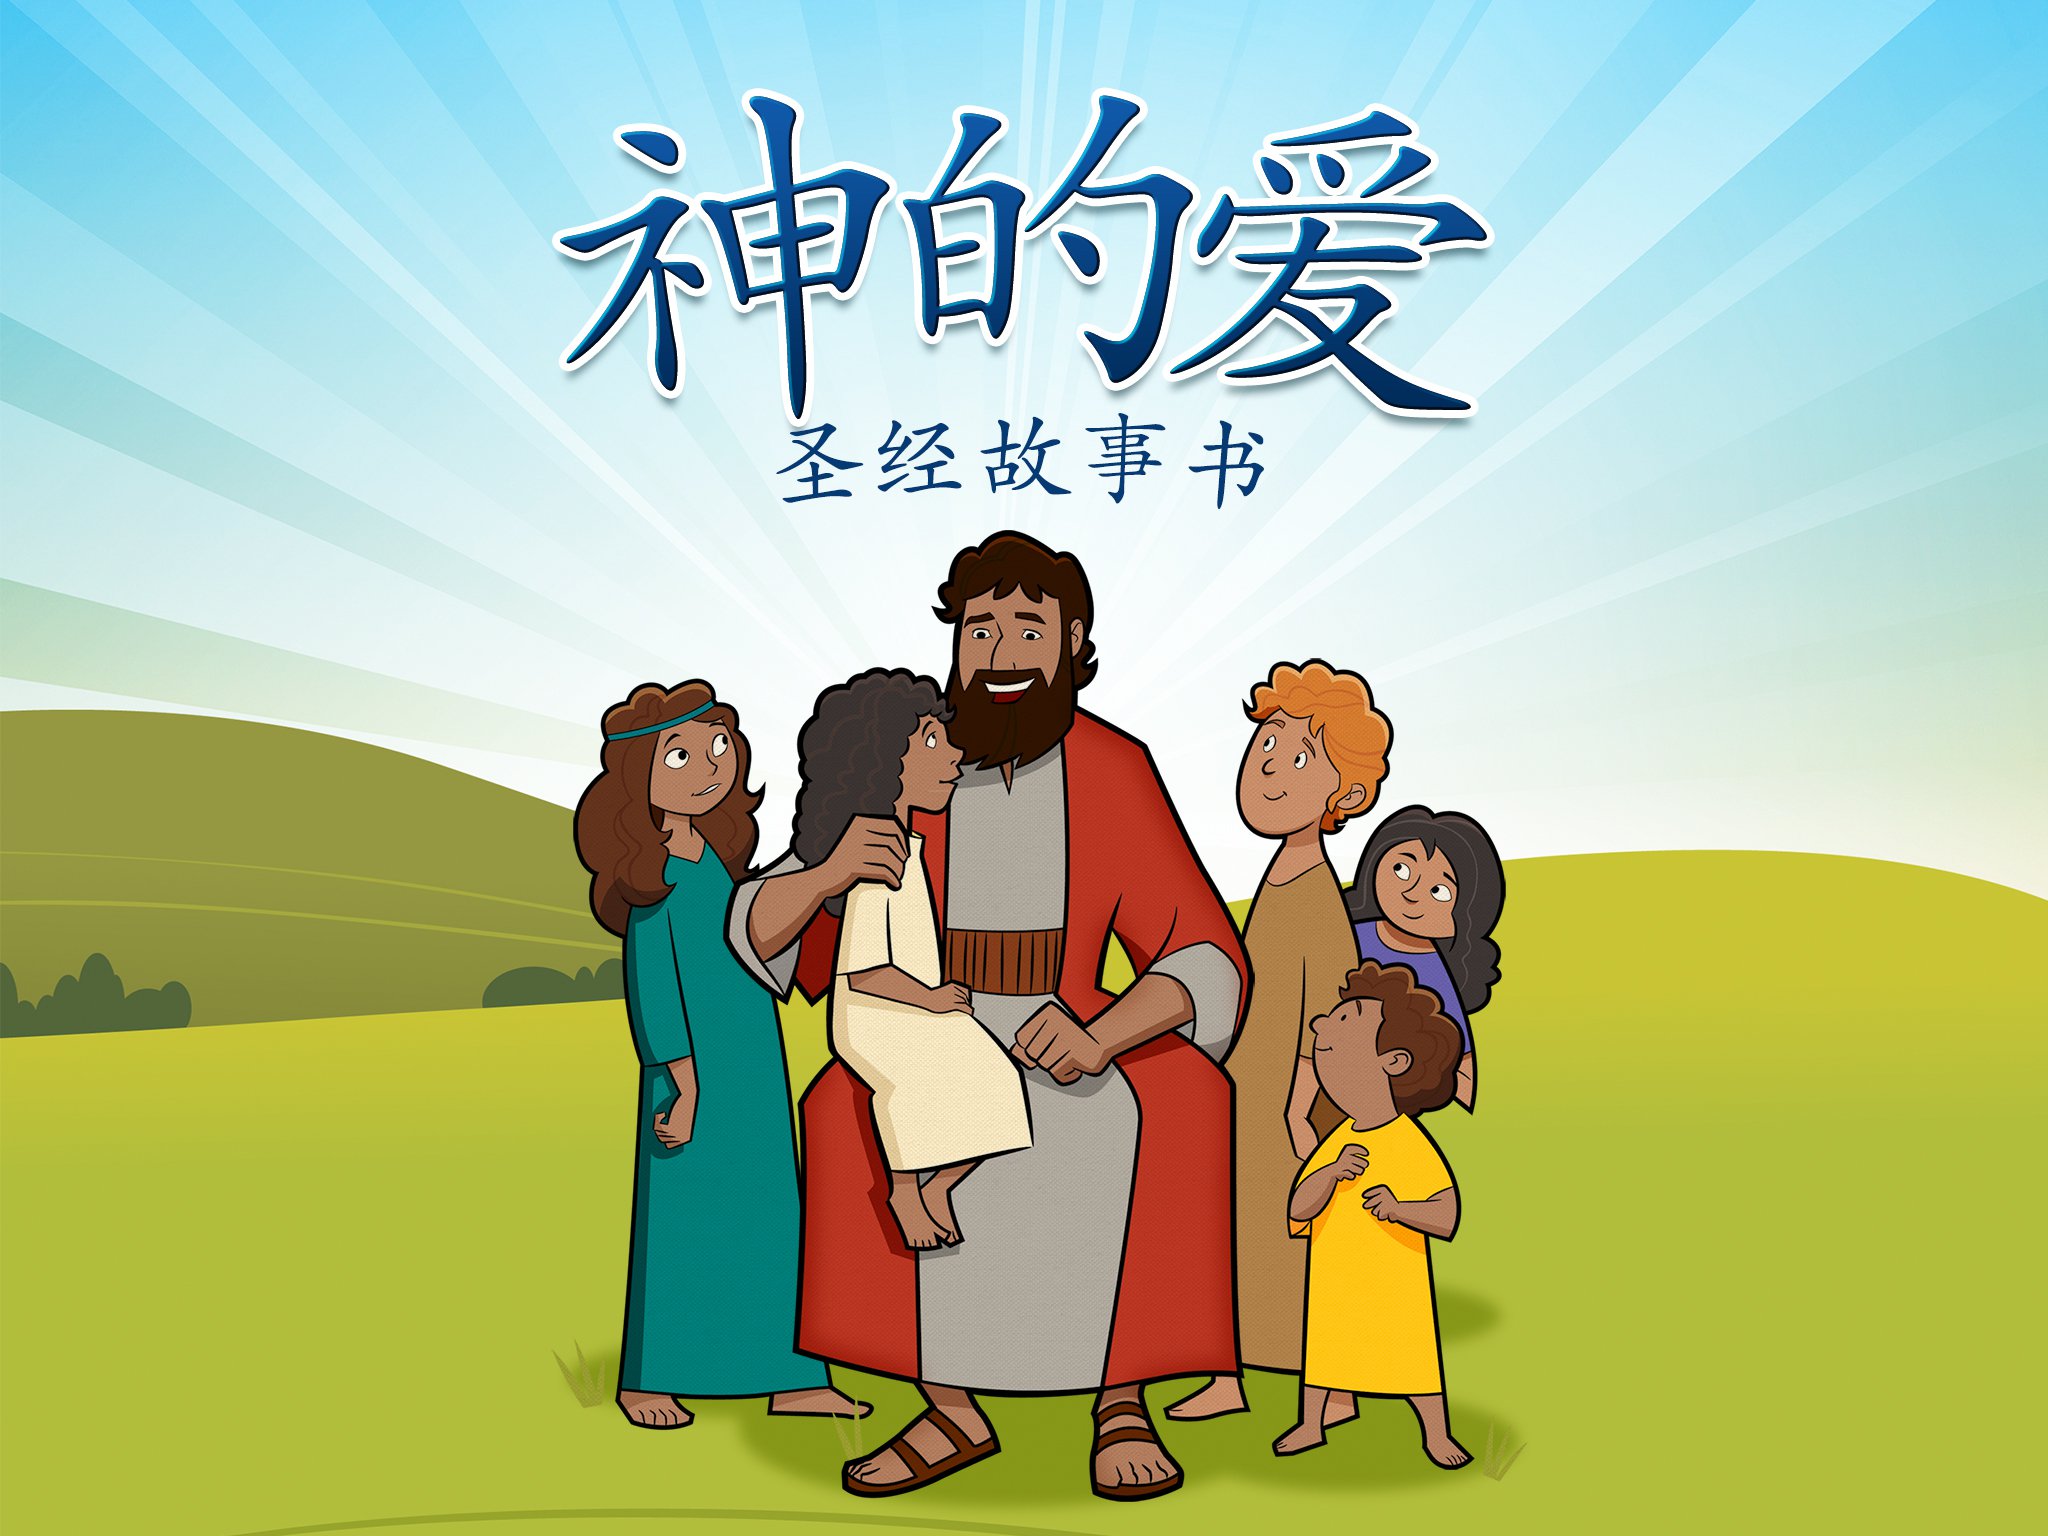 Free Chinese Edition of God's Love Storybook Now Available